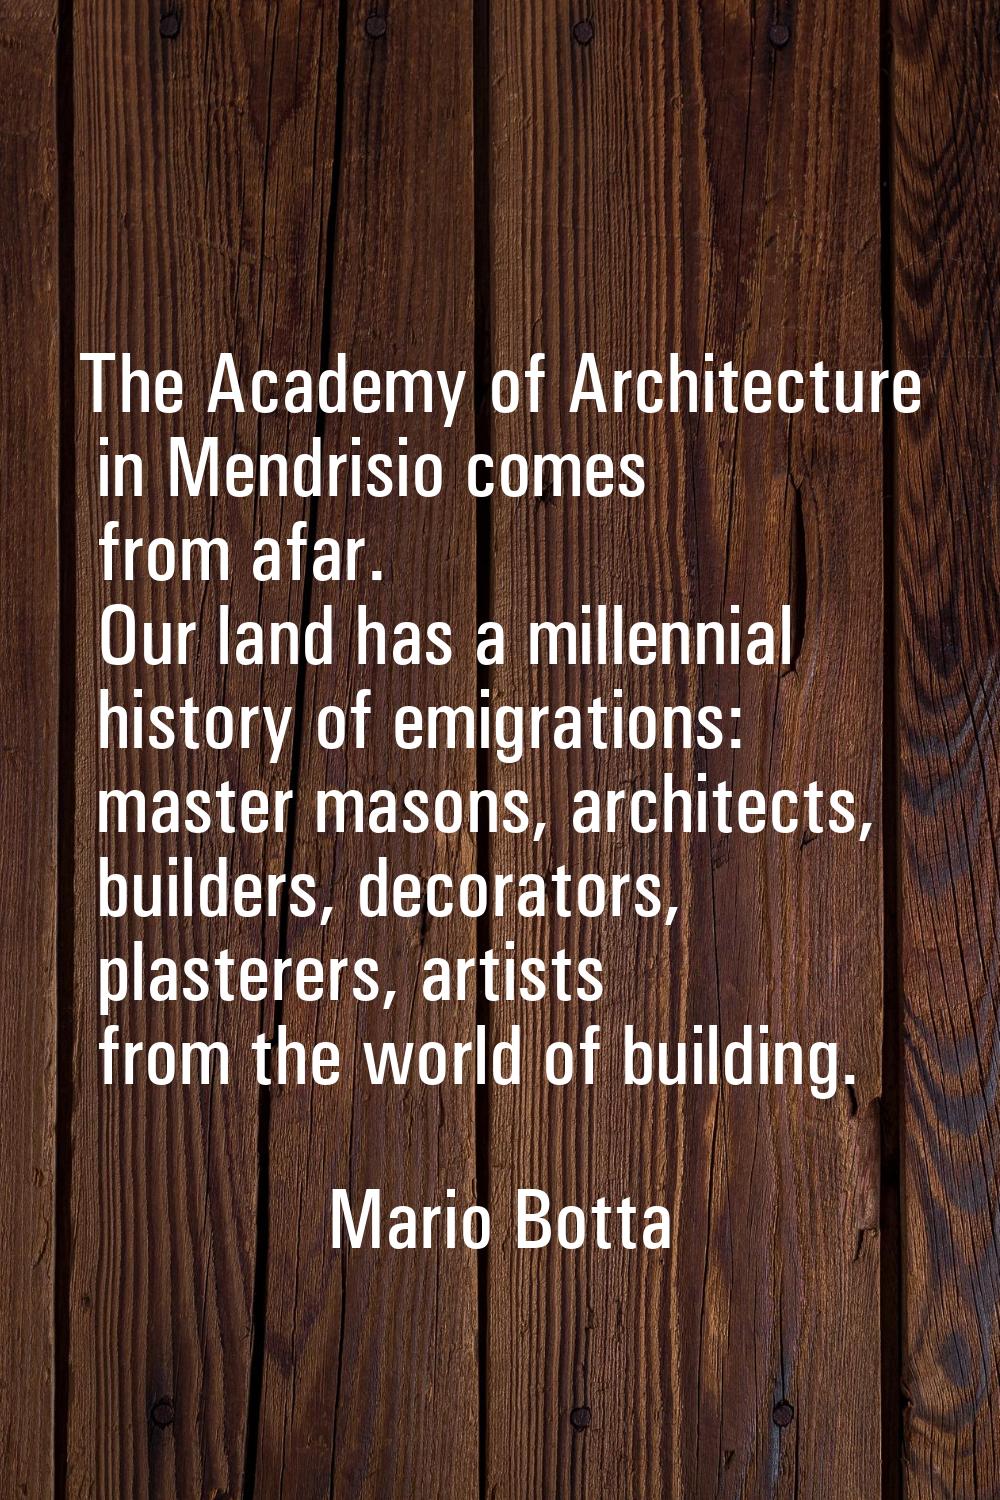 The Academy of Architecture in Mendrisio comes from afar. Our land has a millennial history of emig